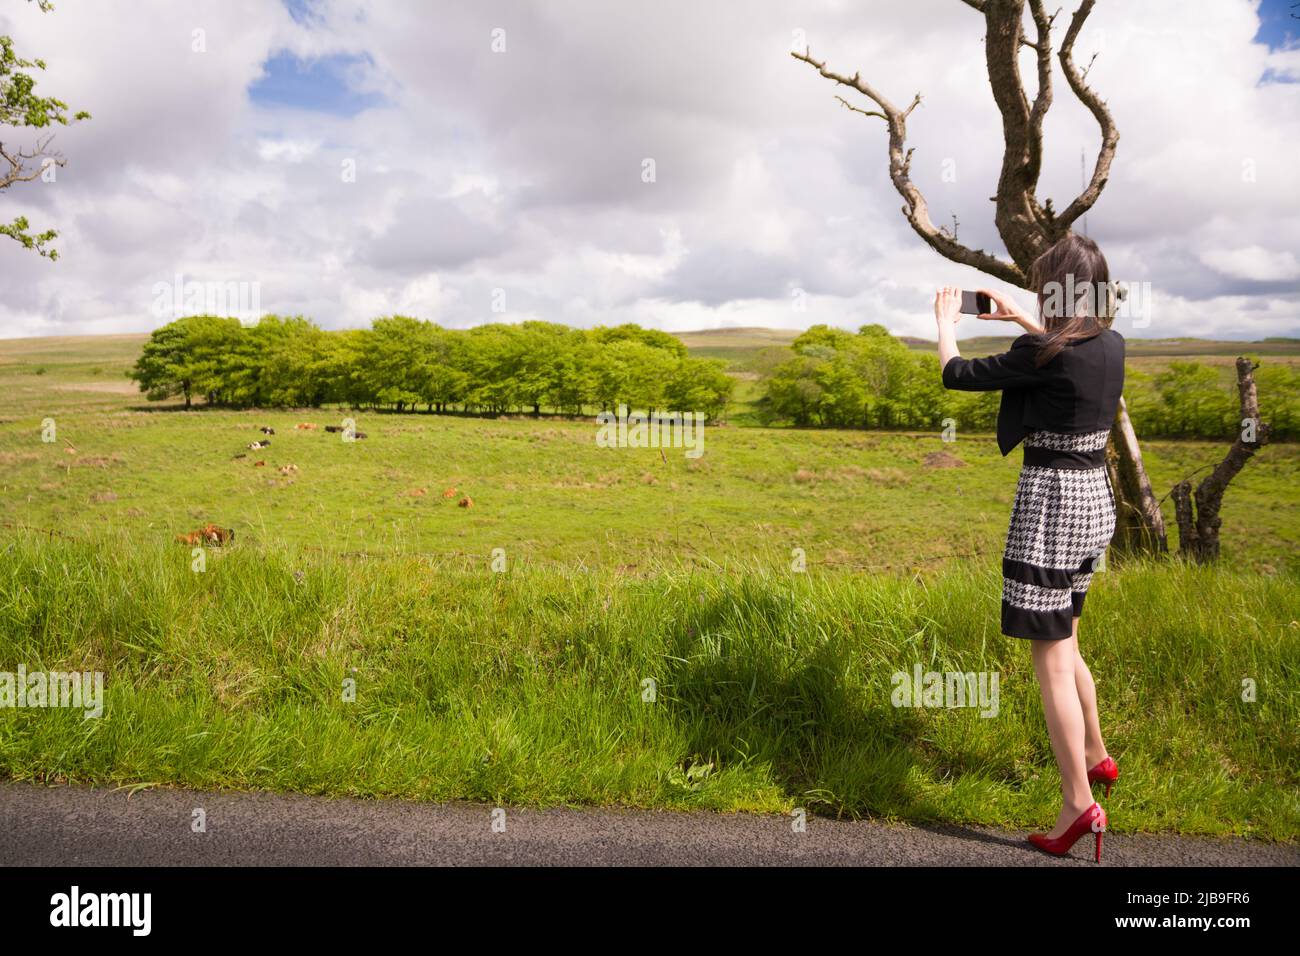 Belfast, United Kingdom - May 20, 2022: Elegant woman photographing the green landscape with ole cows grazing, Belfast Stock Photo